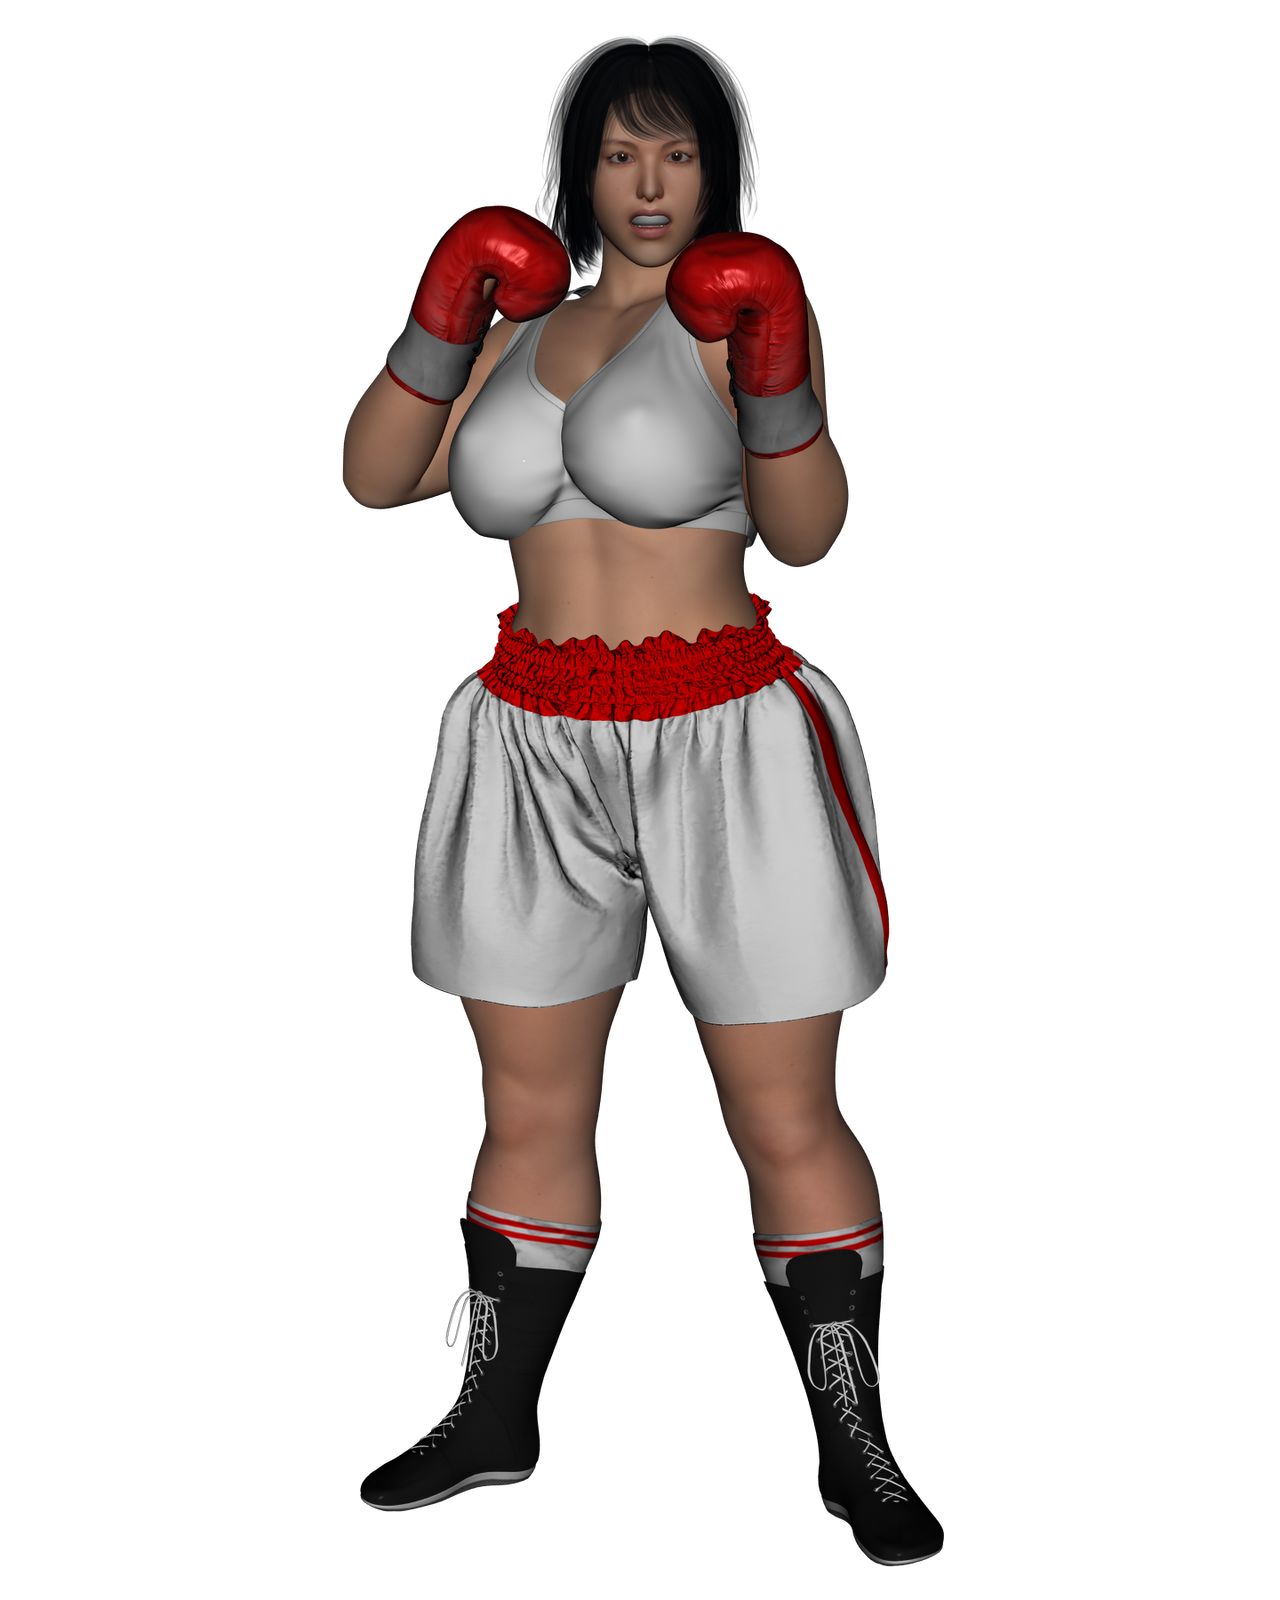 Download PNG image - Female Boxer PNG Free Download 